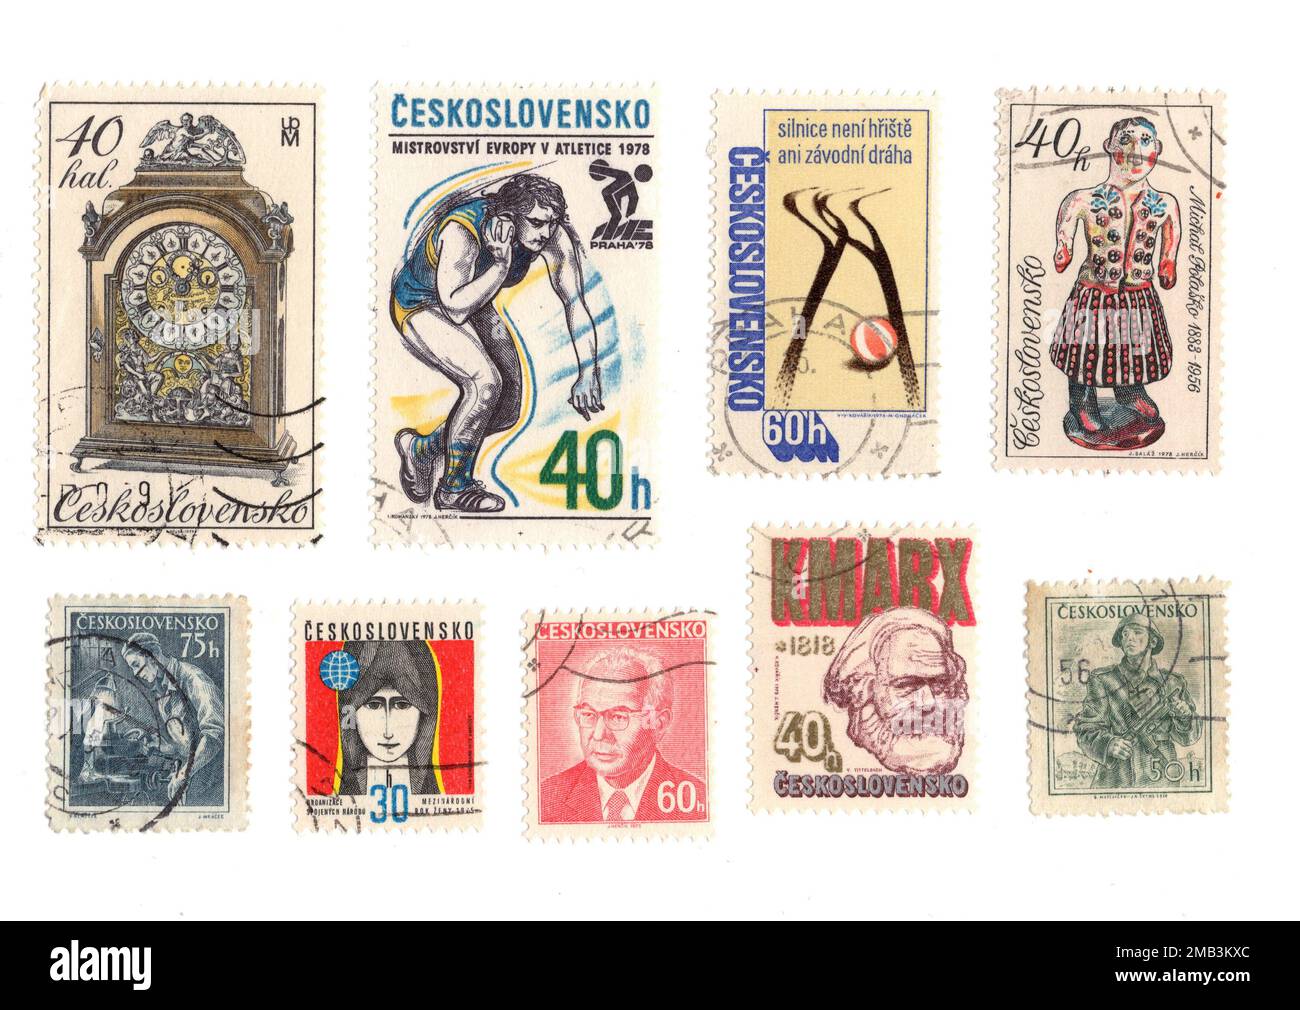 Vintage postage stamps from Czechoslovakia on a white background. Stock Photo